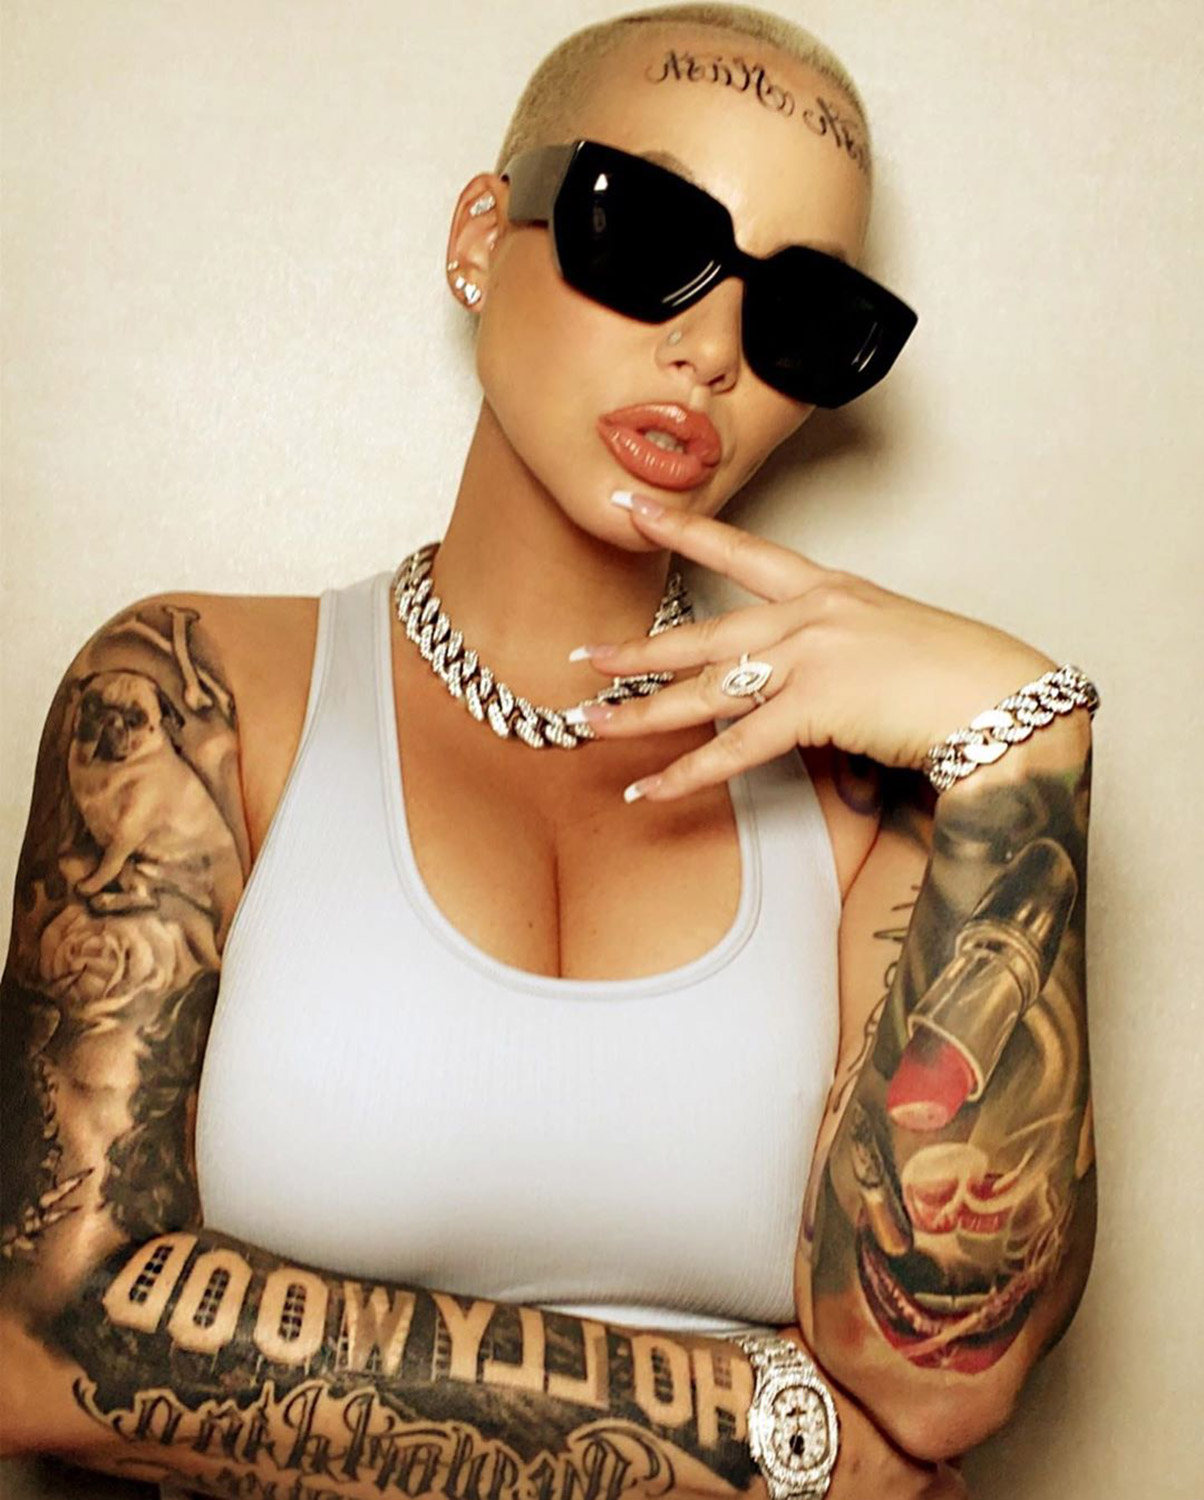 Amber Rose Claps Back After Trolls Slam Her New Face Tattoo Amber Rose/Instagram tout: first photo here https://www.instagram.com/p/B8dMJignYYF/ for inside: https://www.instagram.com/p/B8eaoW_HoSo/